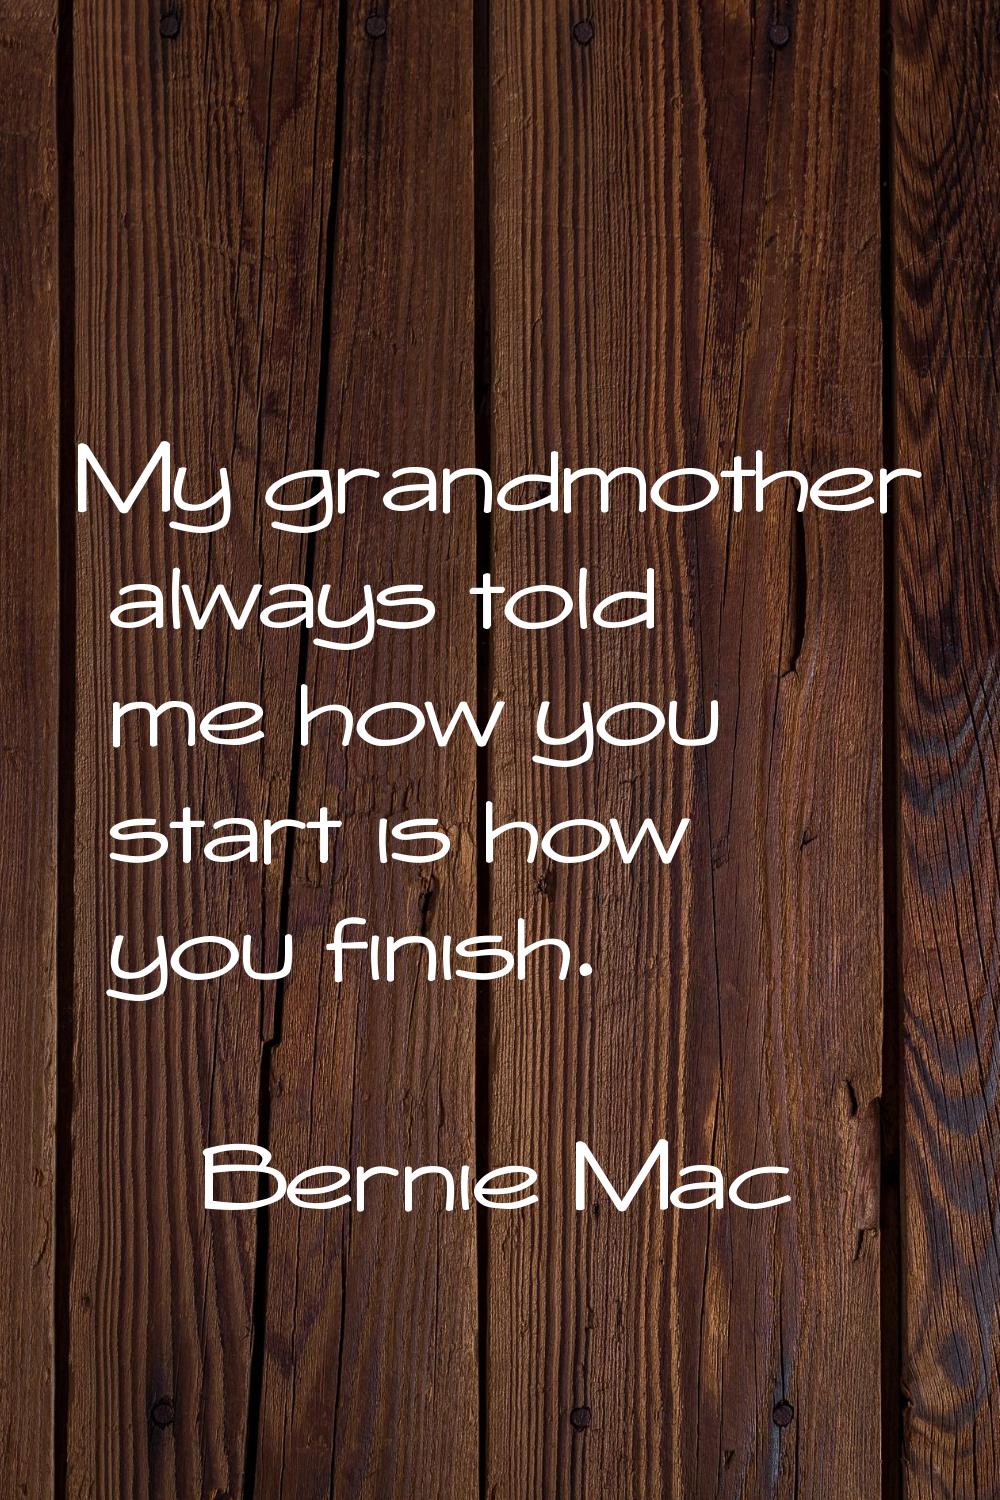 My grandmother always told me how you start is how you finish.